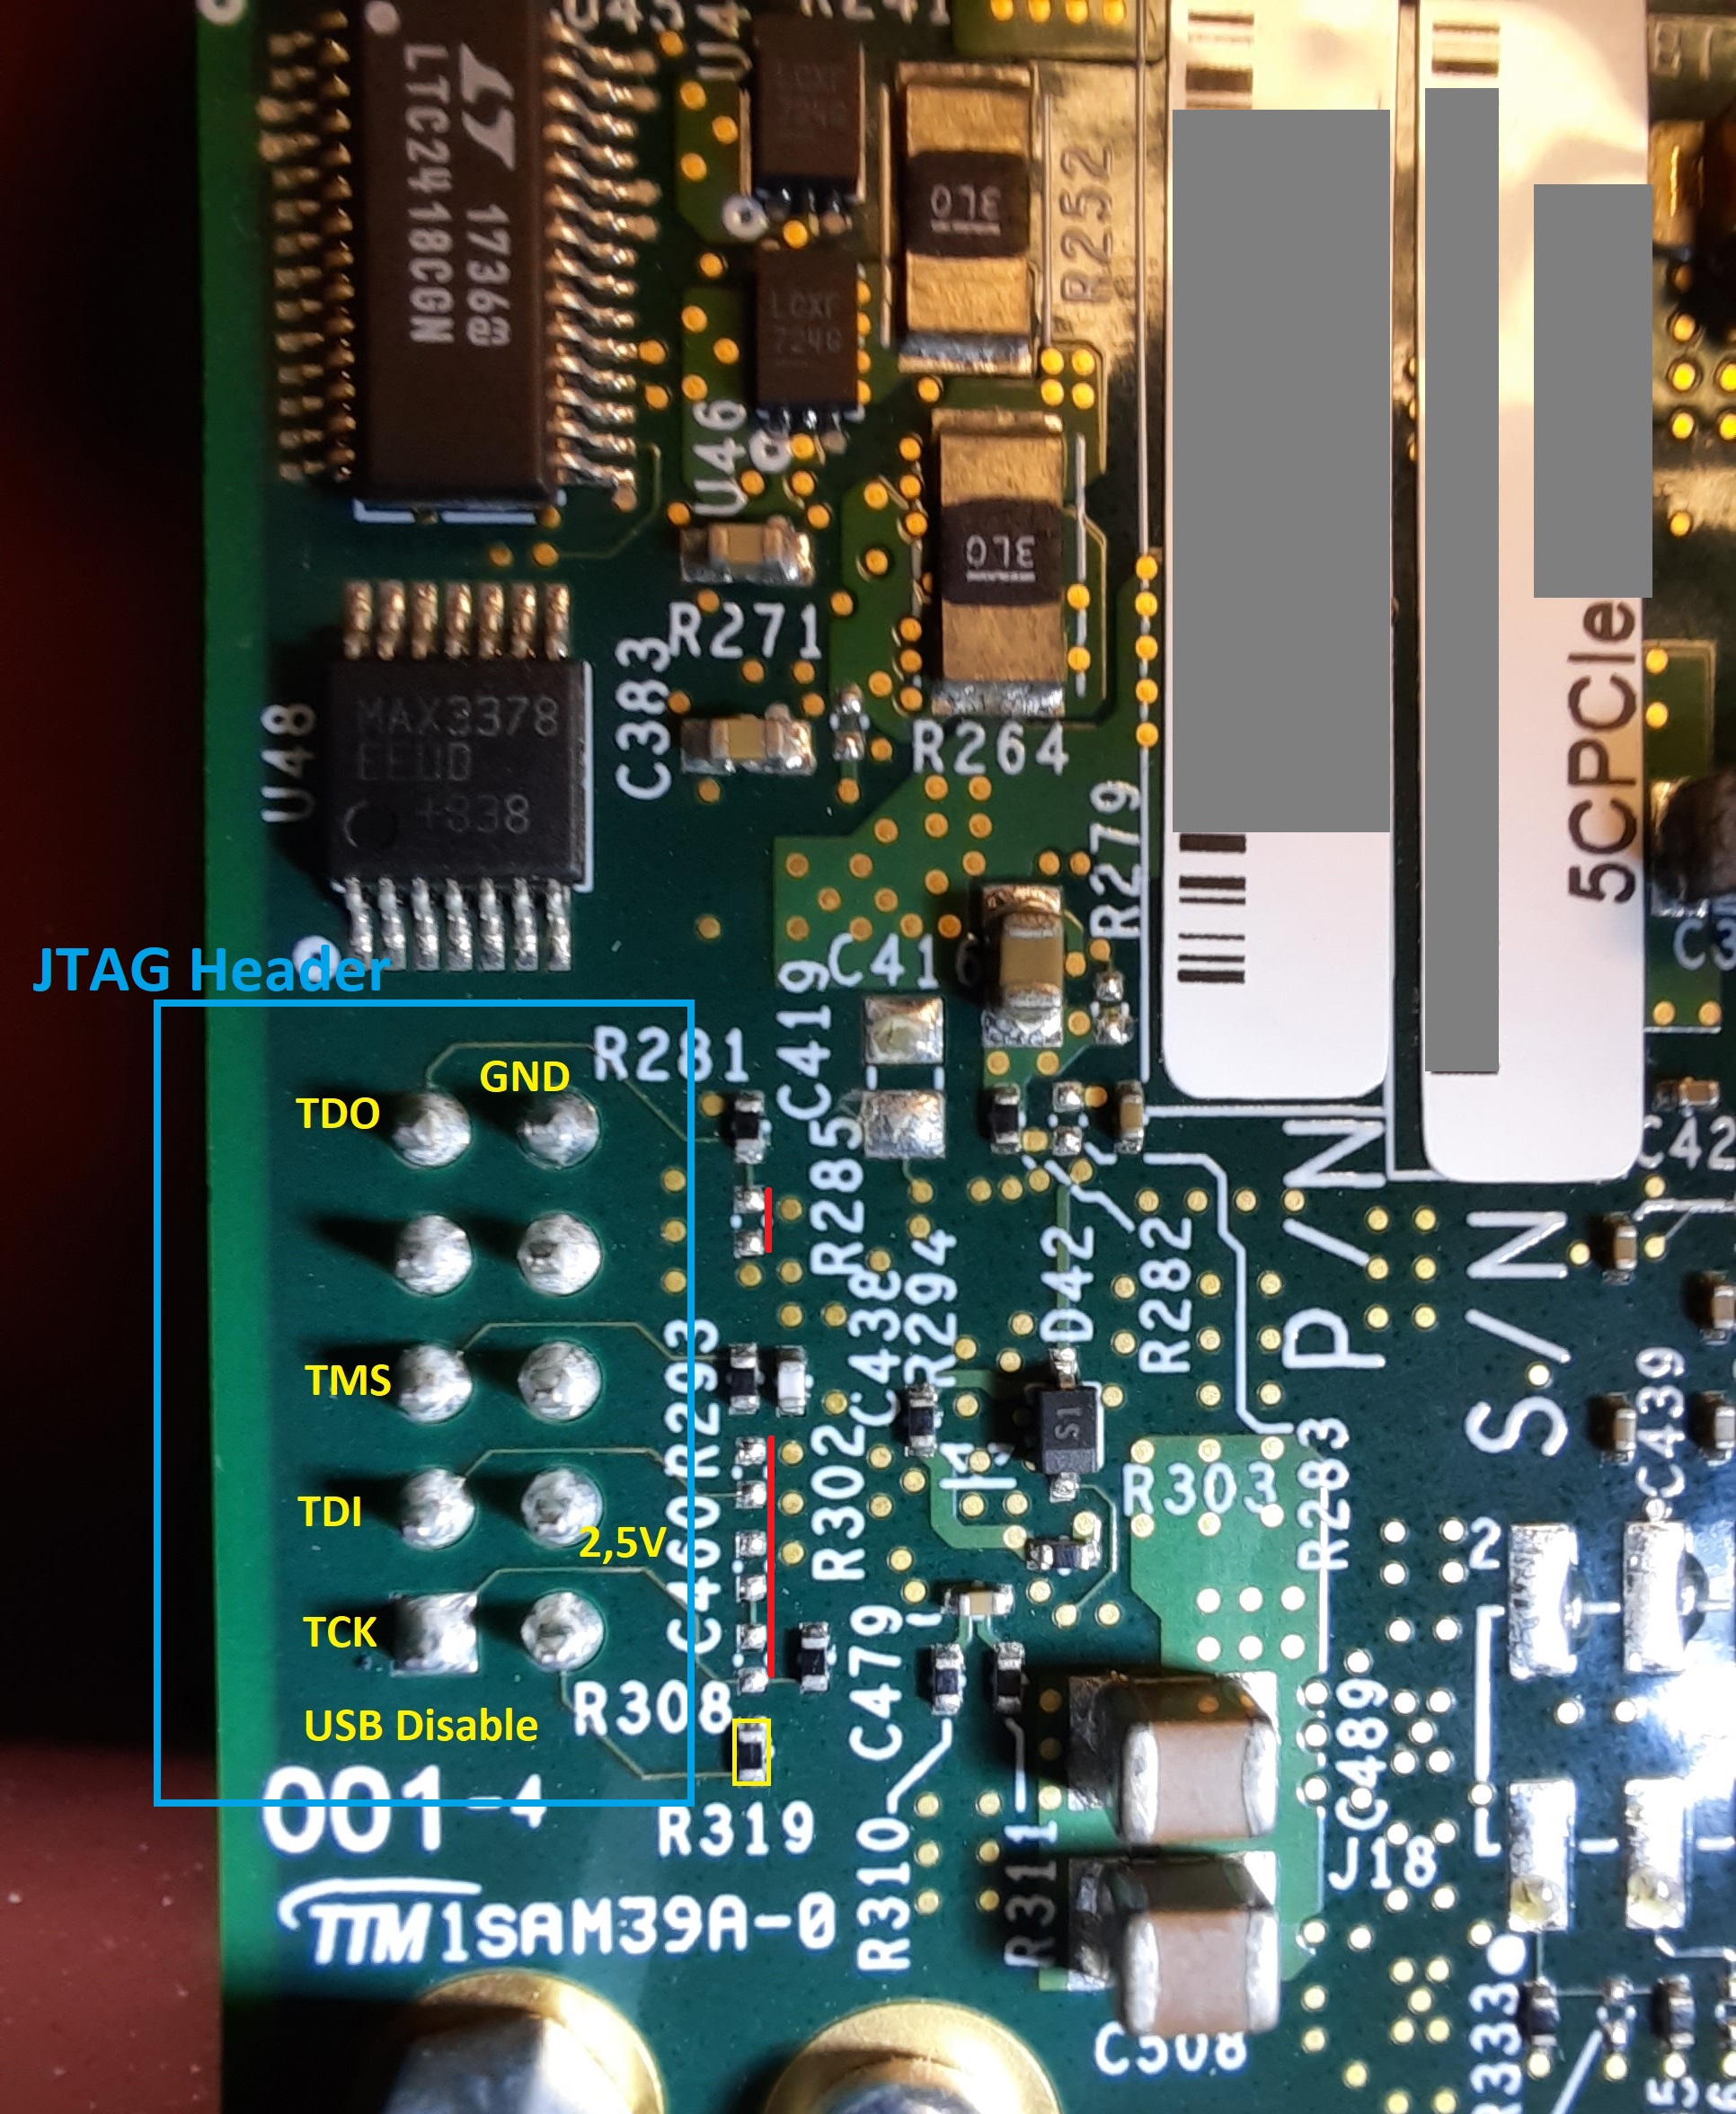 JTAG-Problem: Unable to scan device chain on CV GT Development Kit ...